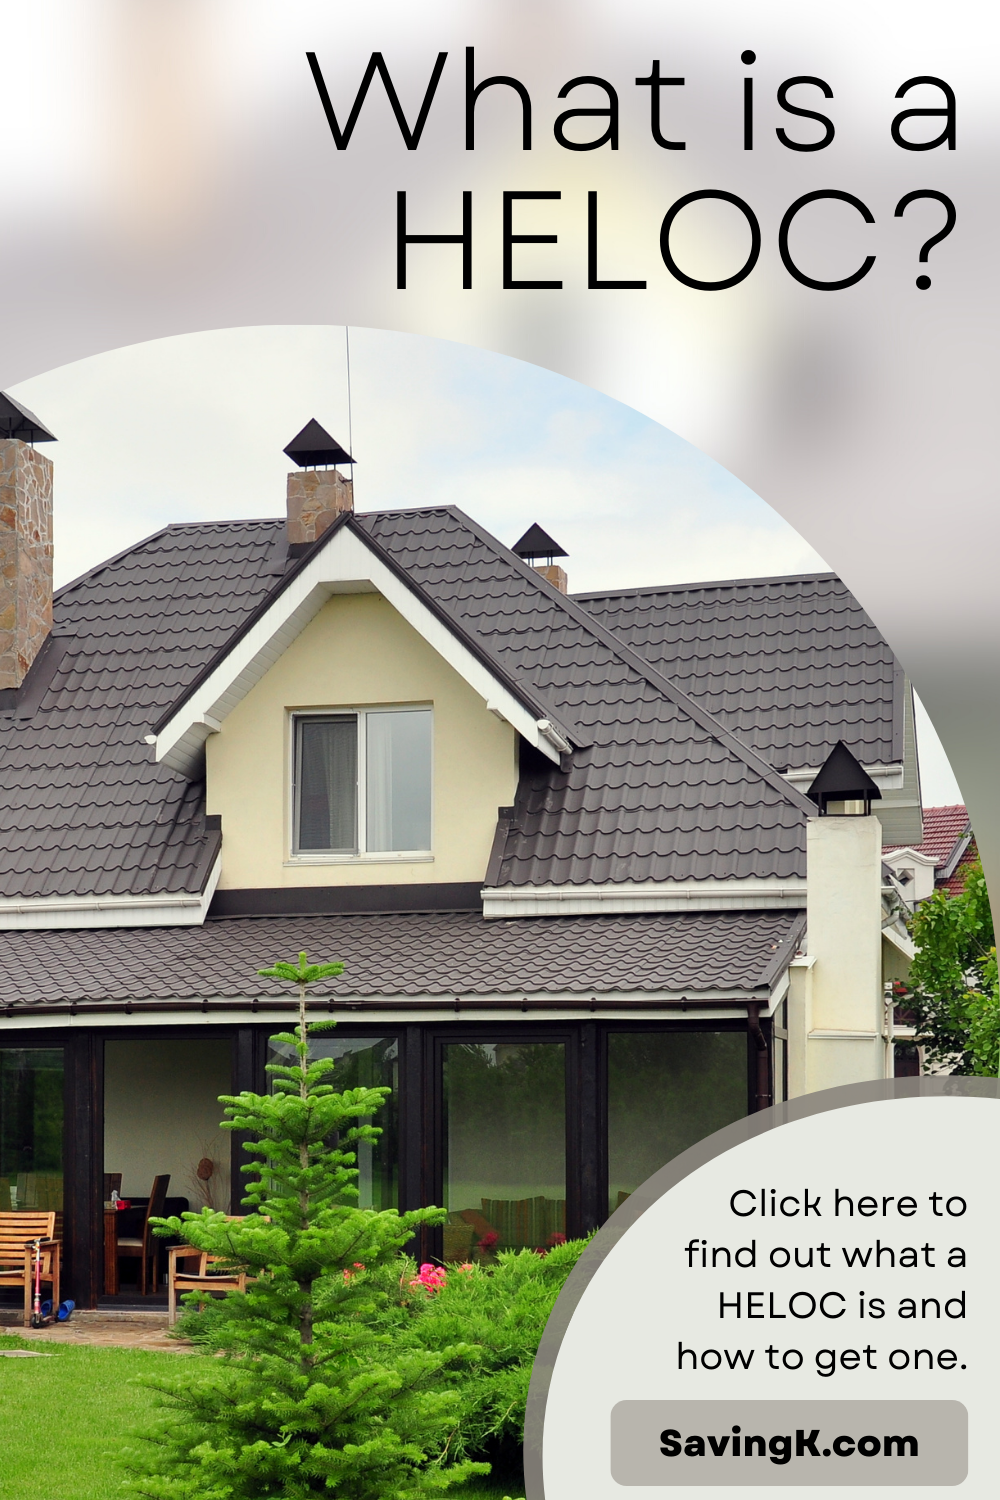 Click here to find out what a HELOC is and how to get one.